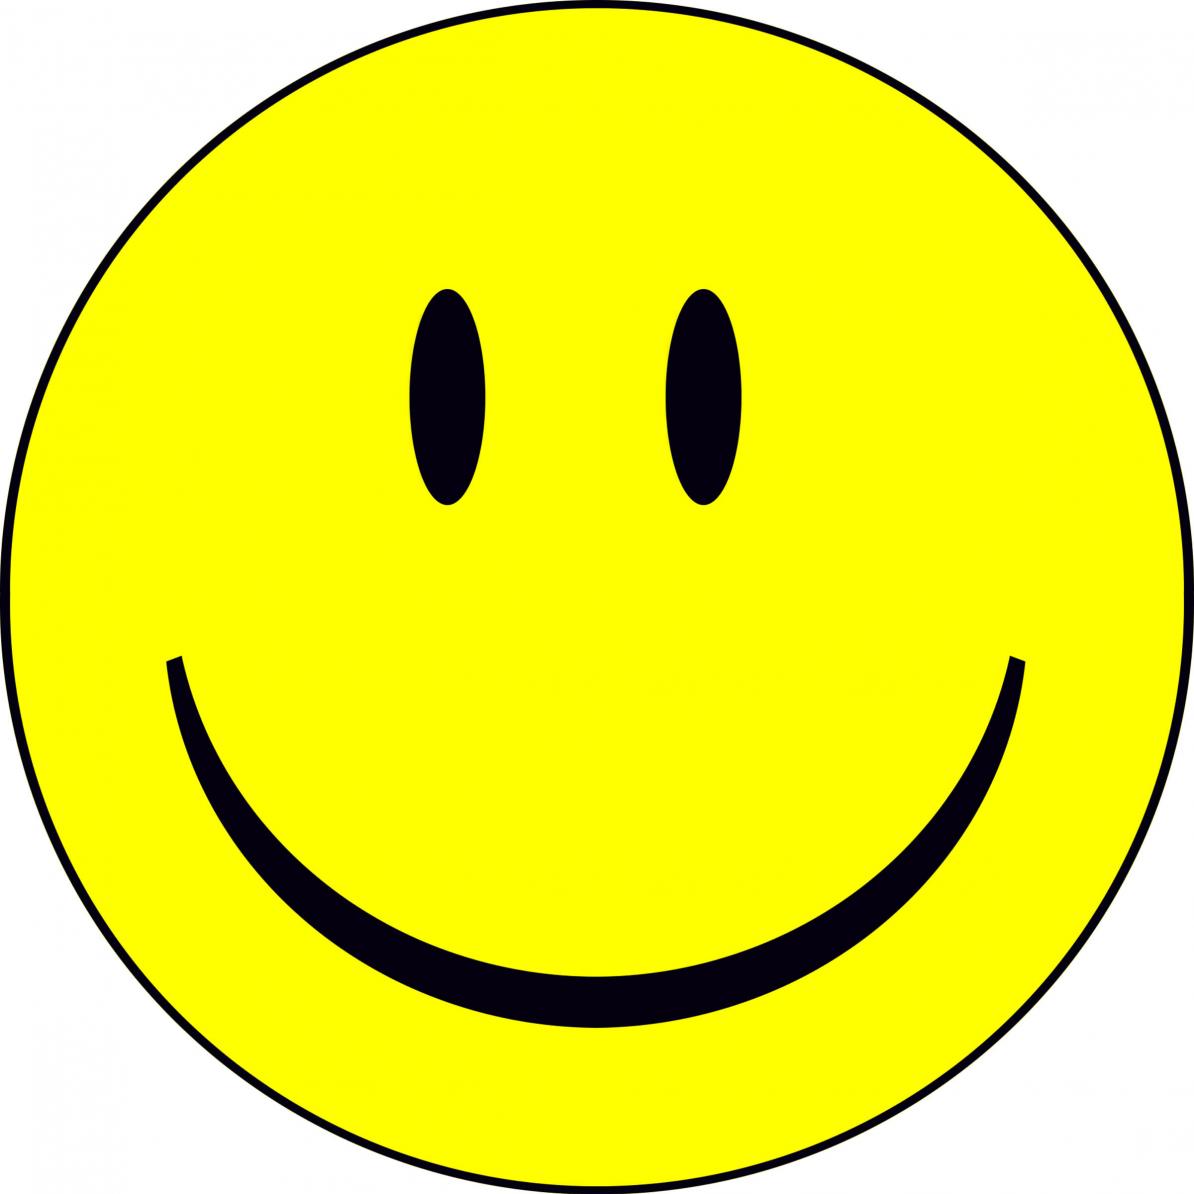 Laughing Smiley Face Clip Art - Happy Face Images Clip Art